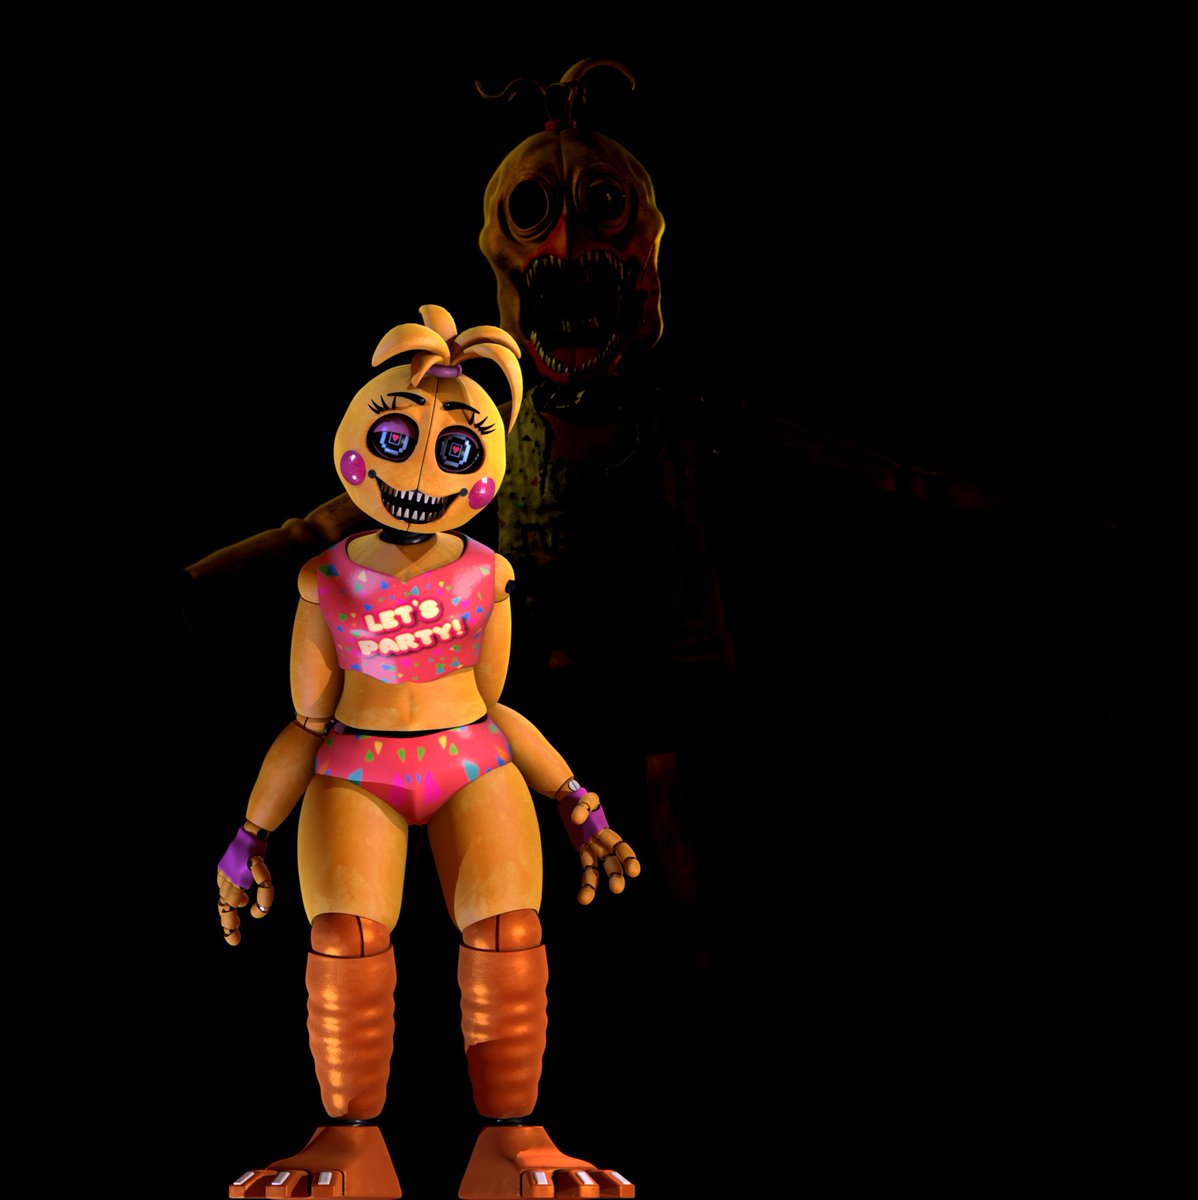 #fnaf. #fnafart. #chica. made a stylized toy chica and she was fun to